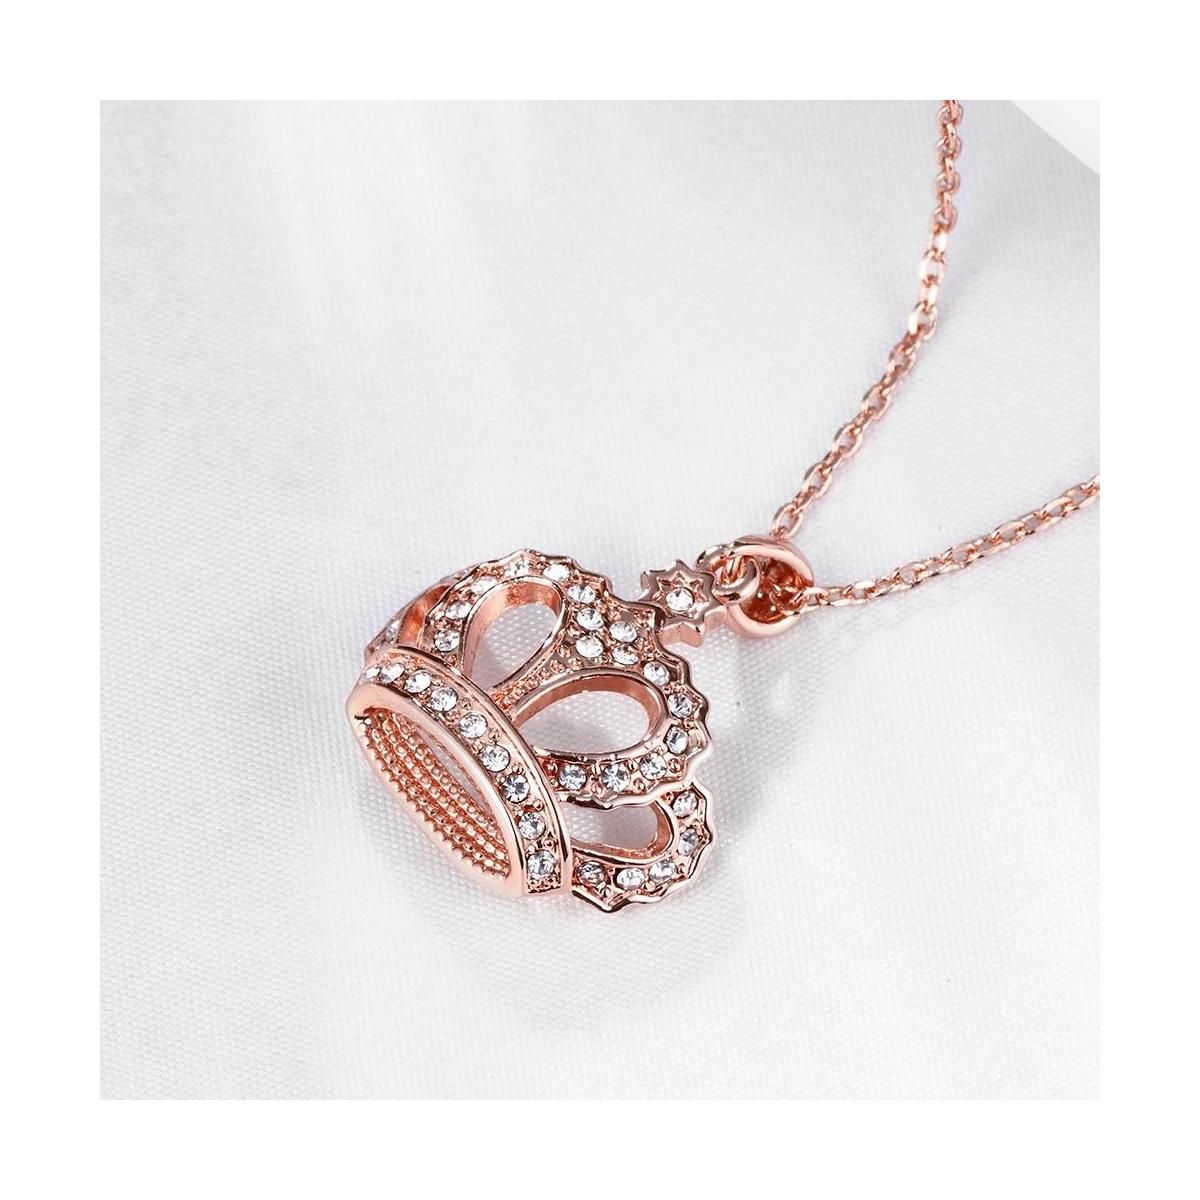 Diamond Crown Pendant Necklaces Rose Gold Silver Alloy Pendant with 18 Inches Chain Fashion Necklace Jewelry